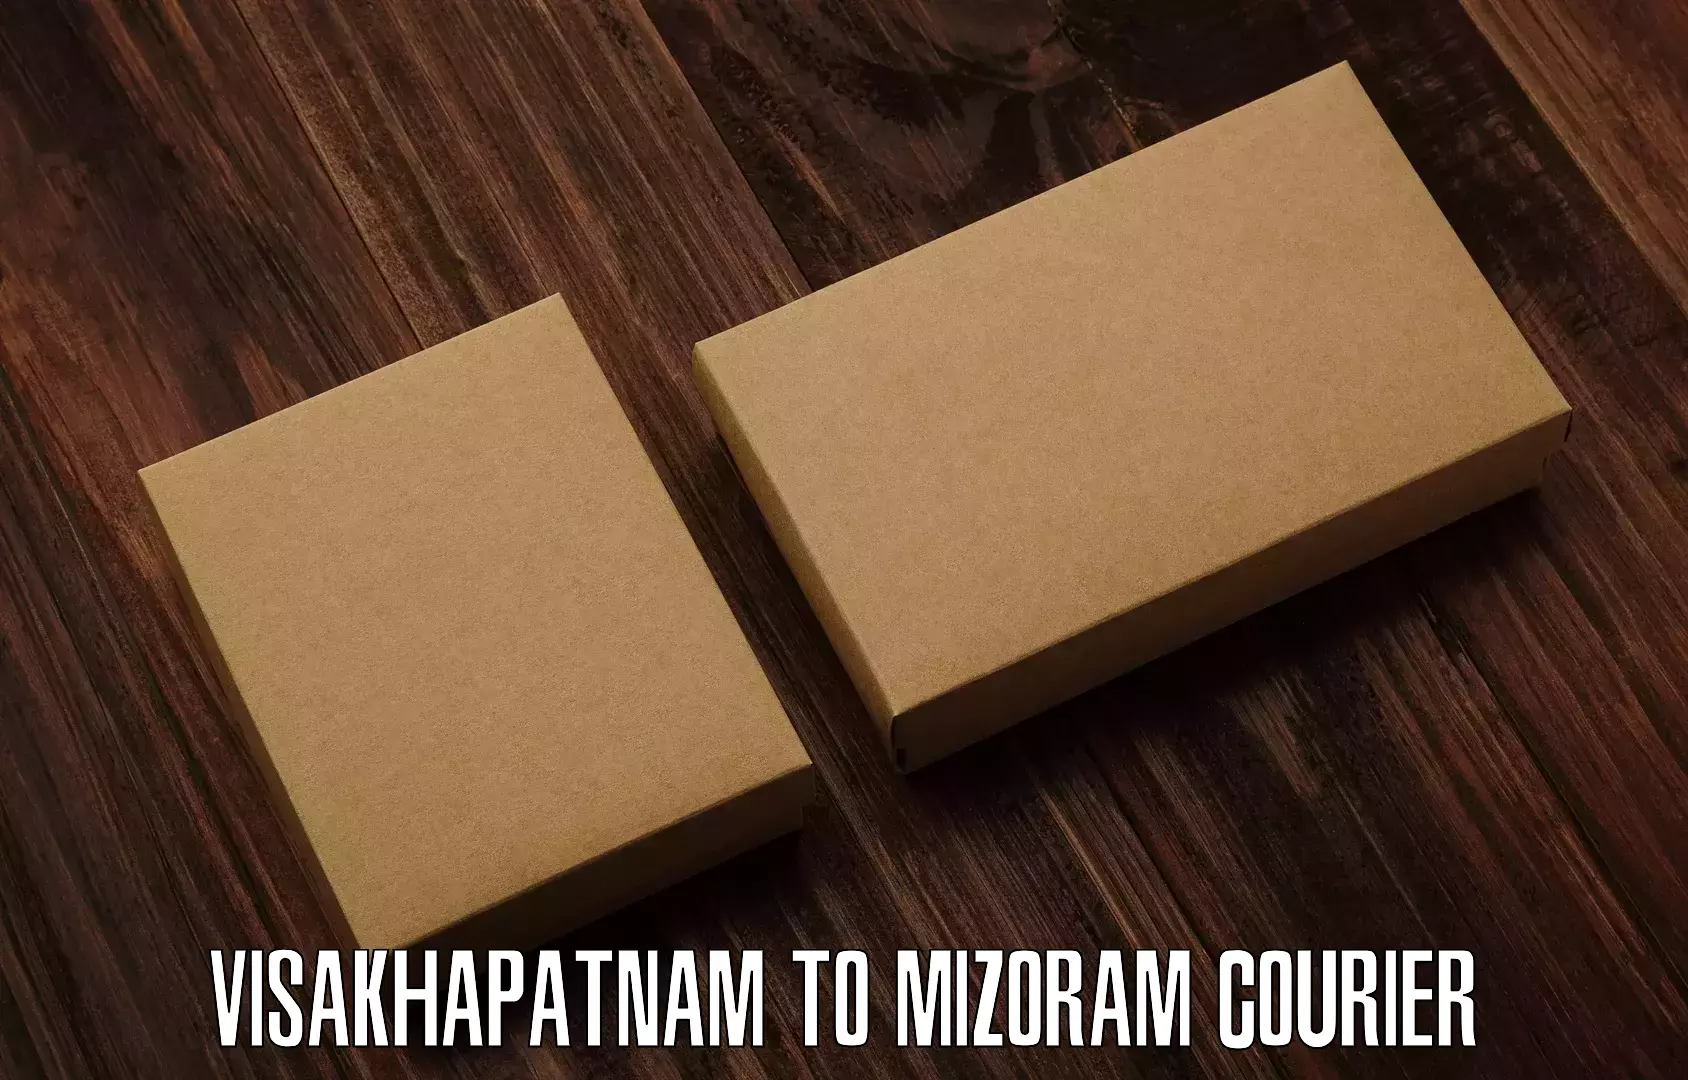 Package delivery network Visakhapatnam to Mizoram